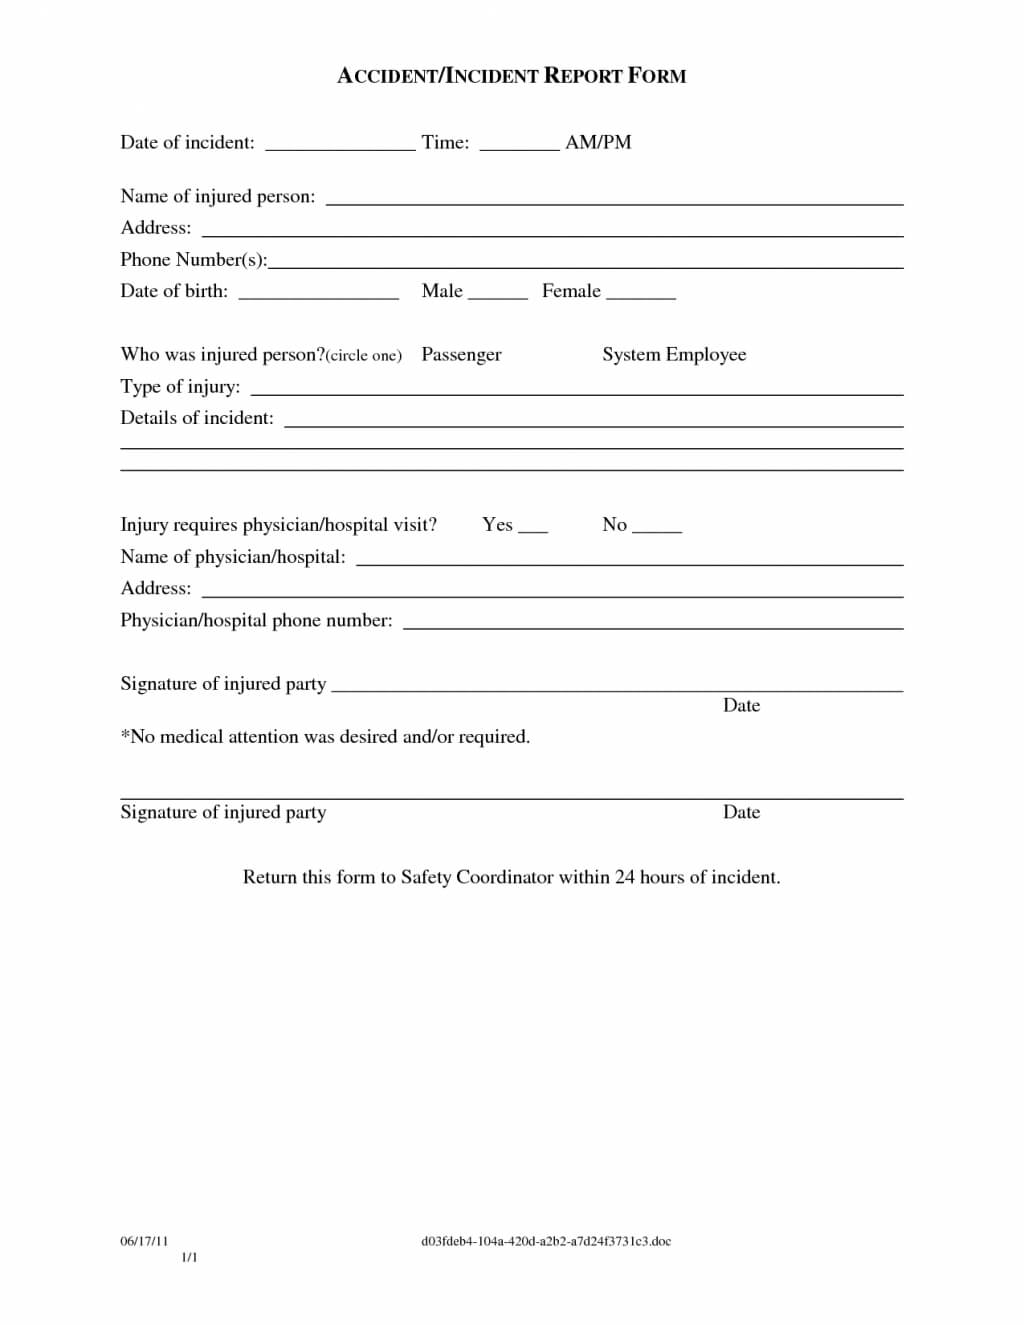 Customer Incident Report Rm Gese Ciceros Co Injury Template Regarding Customer Incident Report Form Template